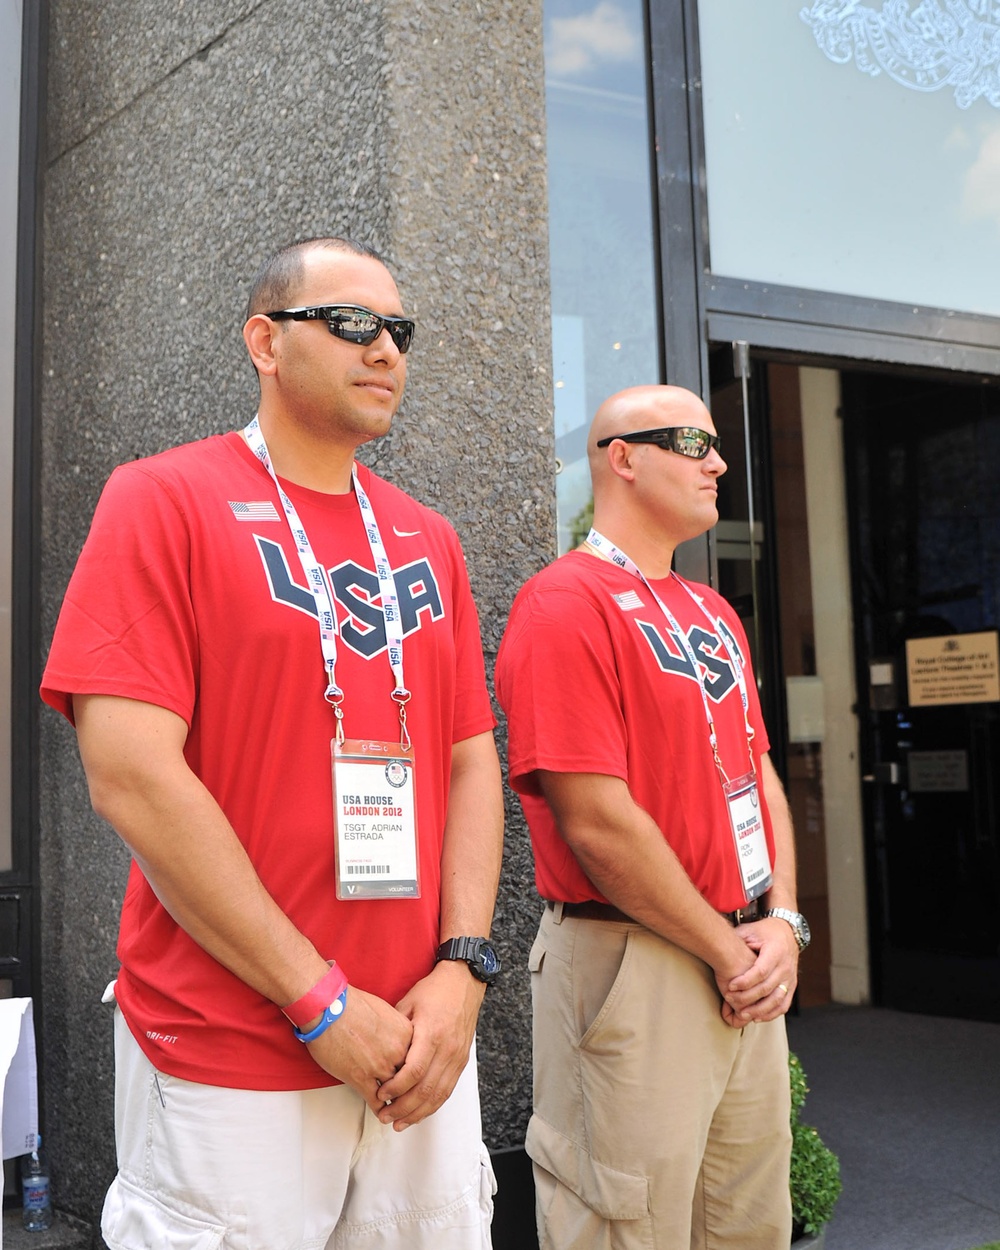 Service members support Team USA during 2012 Olympics, Paralympic Games